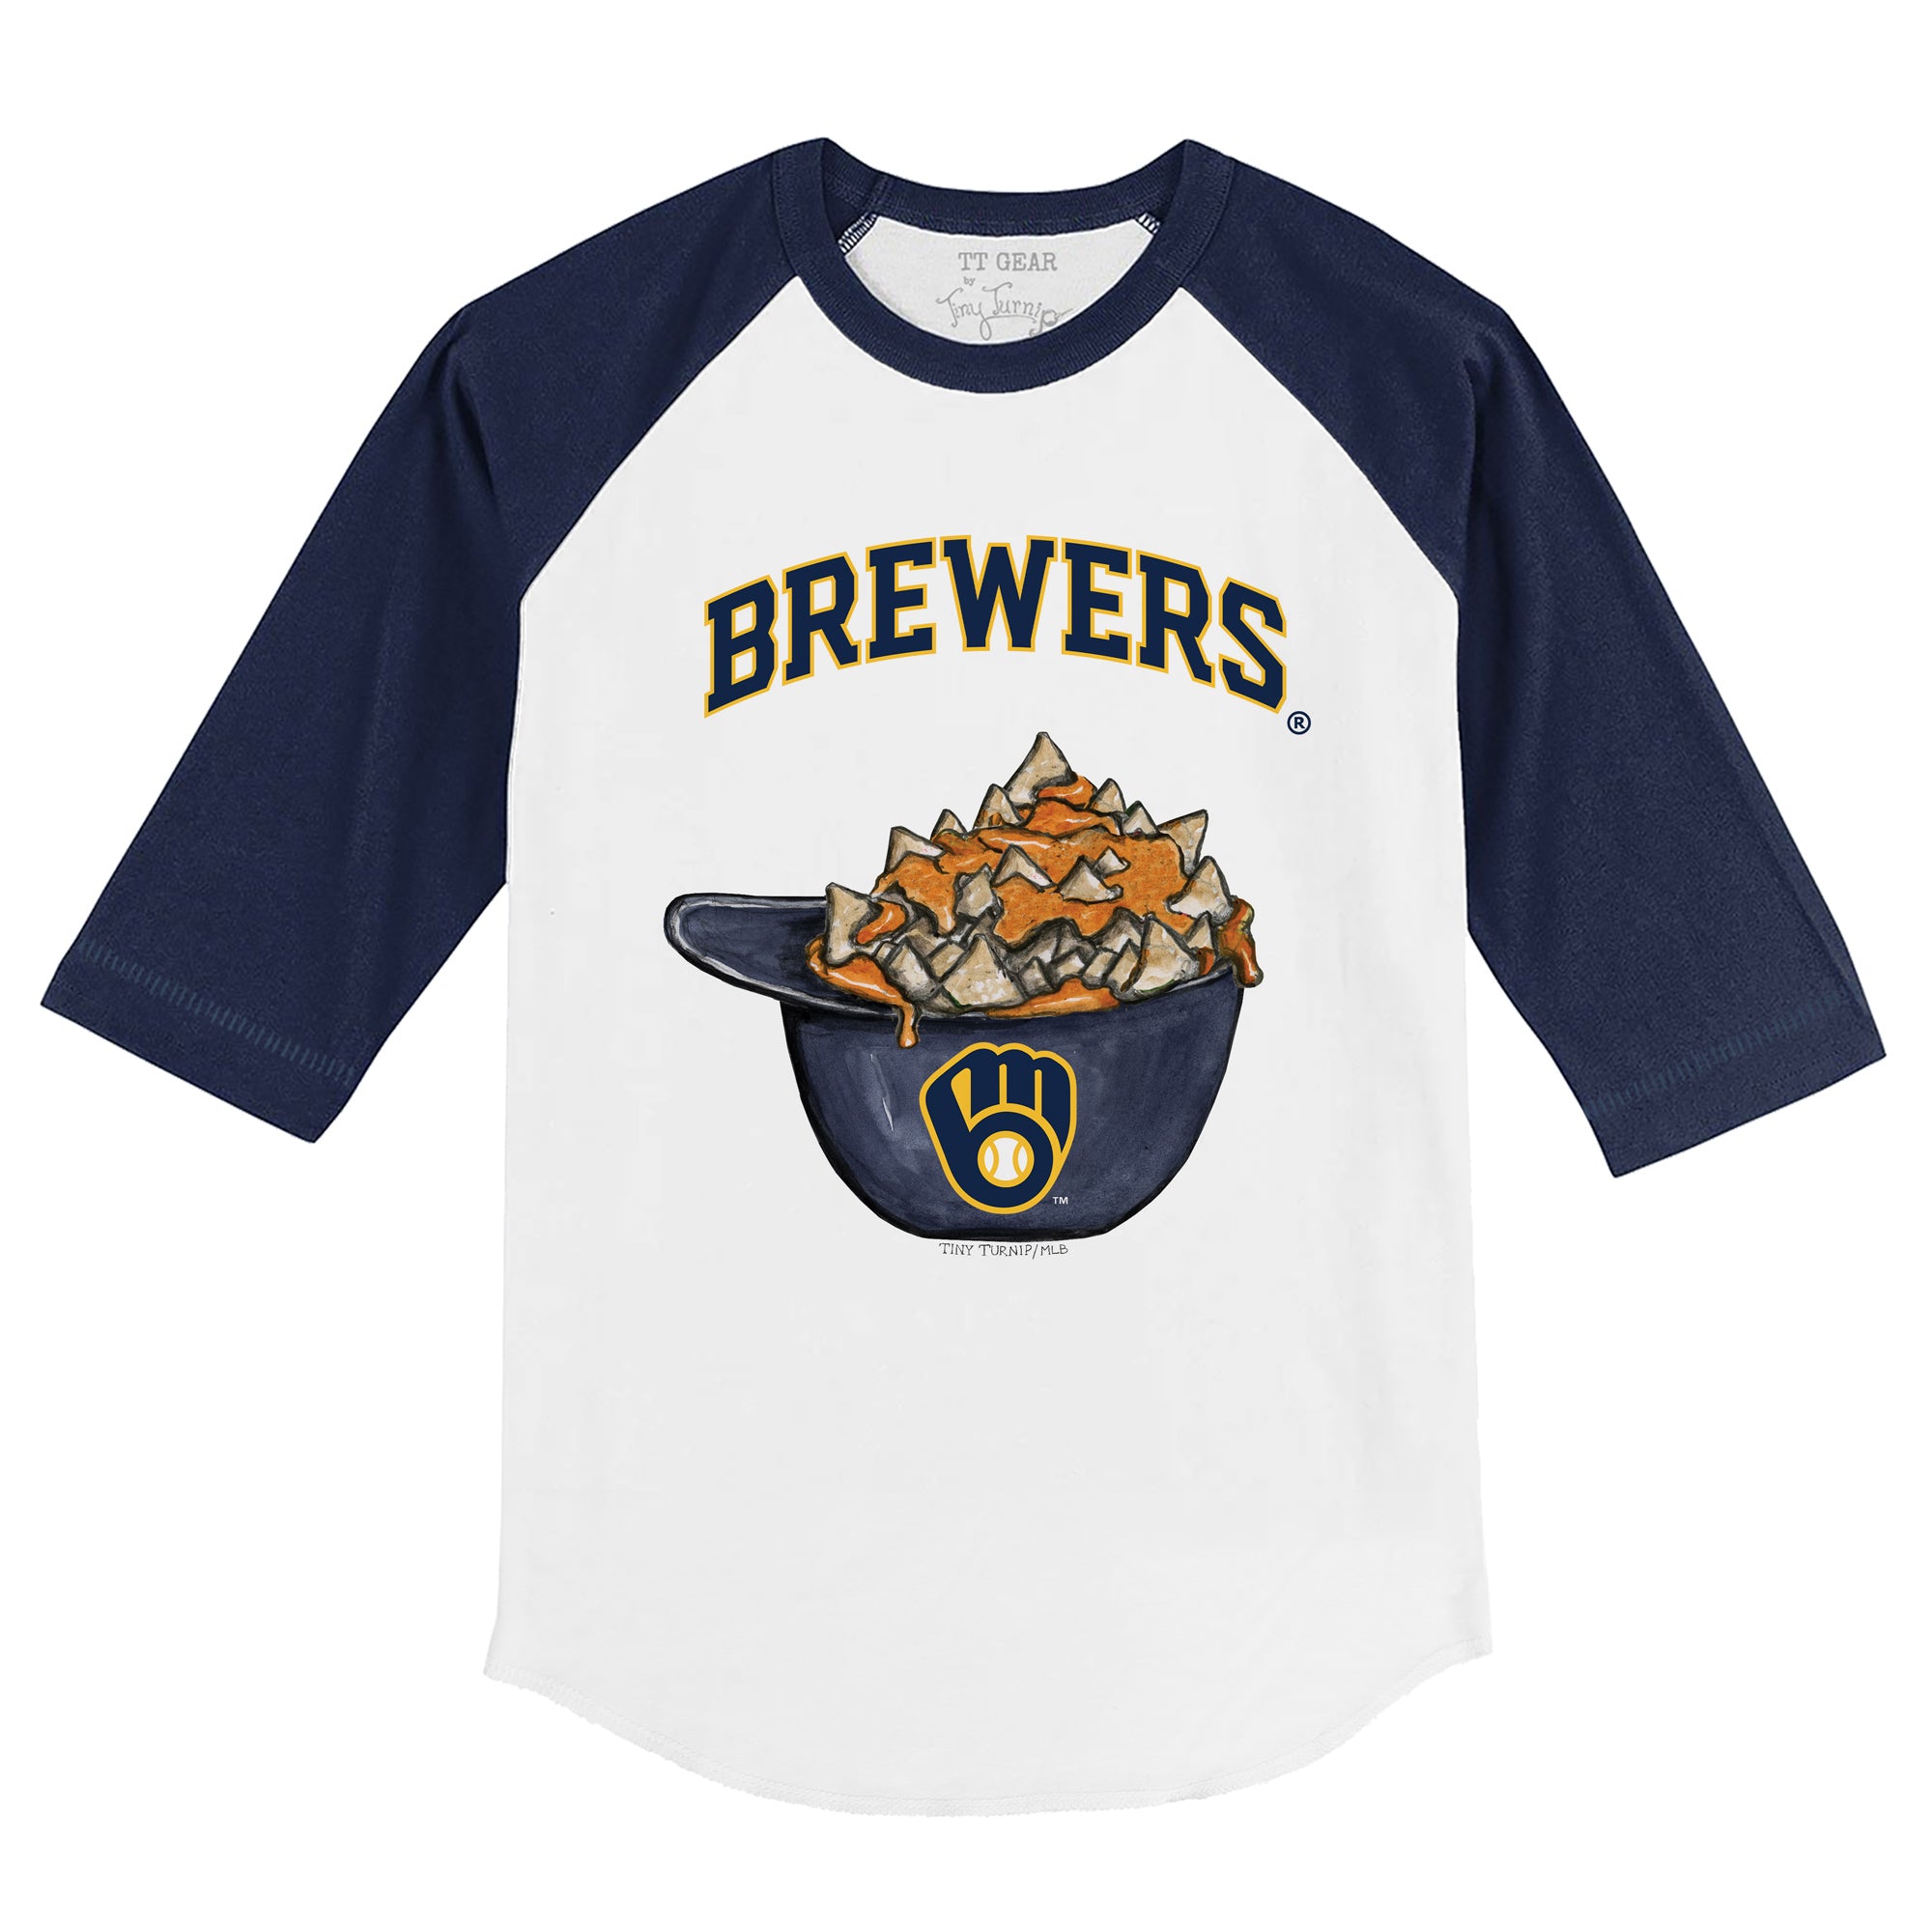 Kids Milwaukee Brewers Gifts & Gear, Youth Brewers Apparel